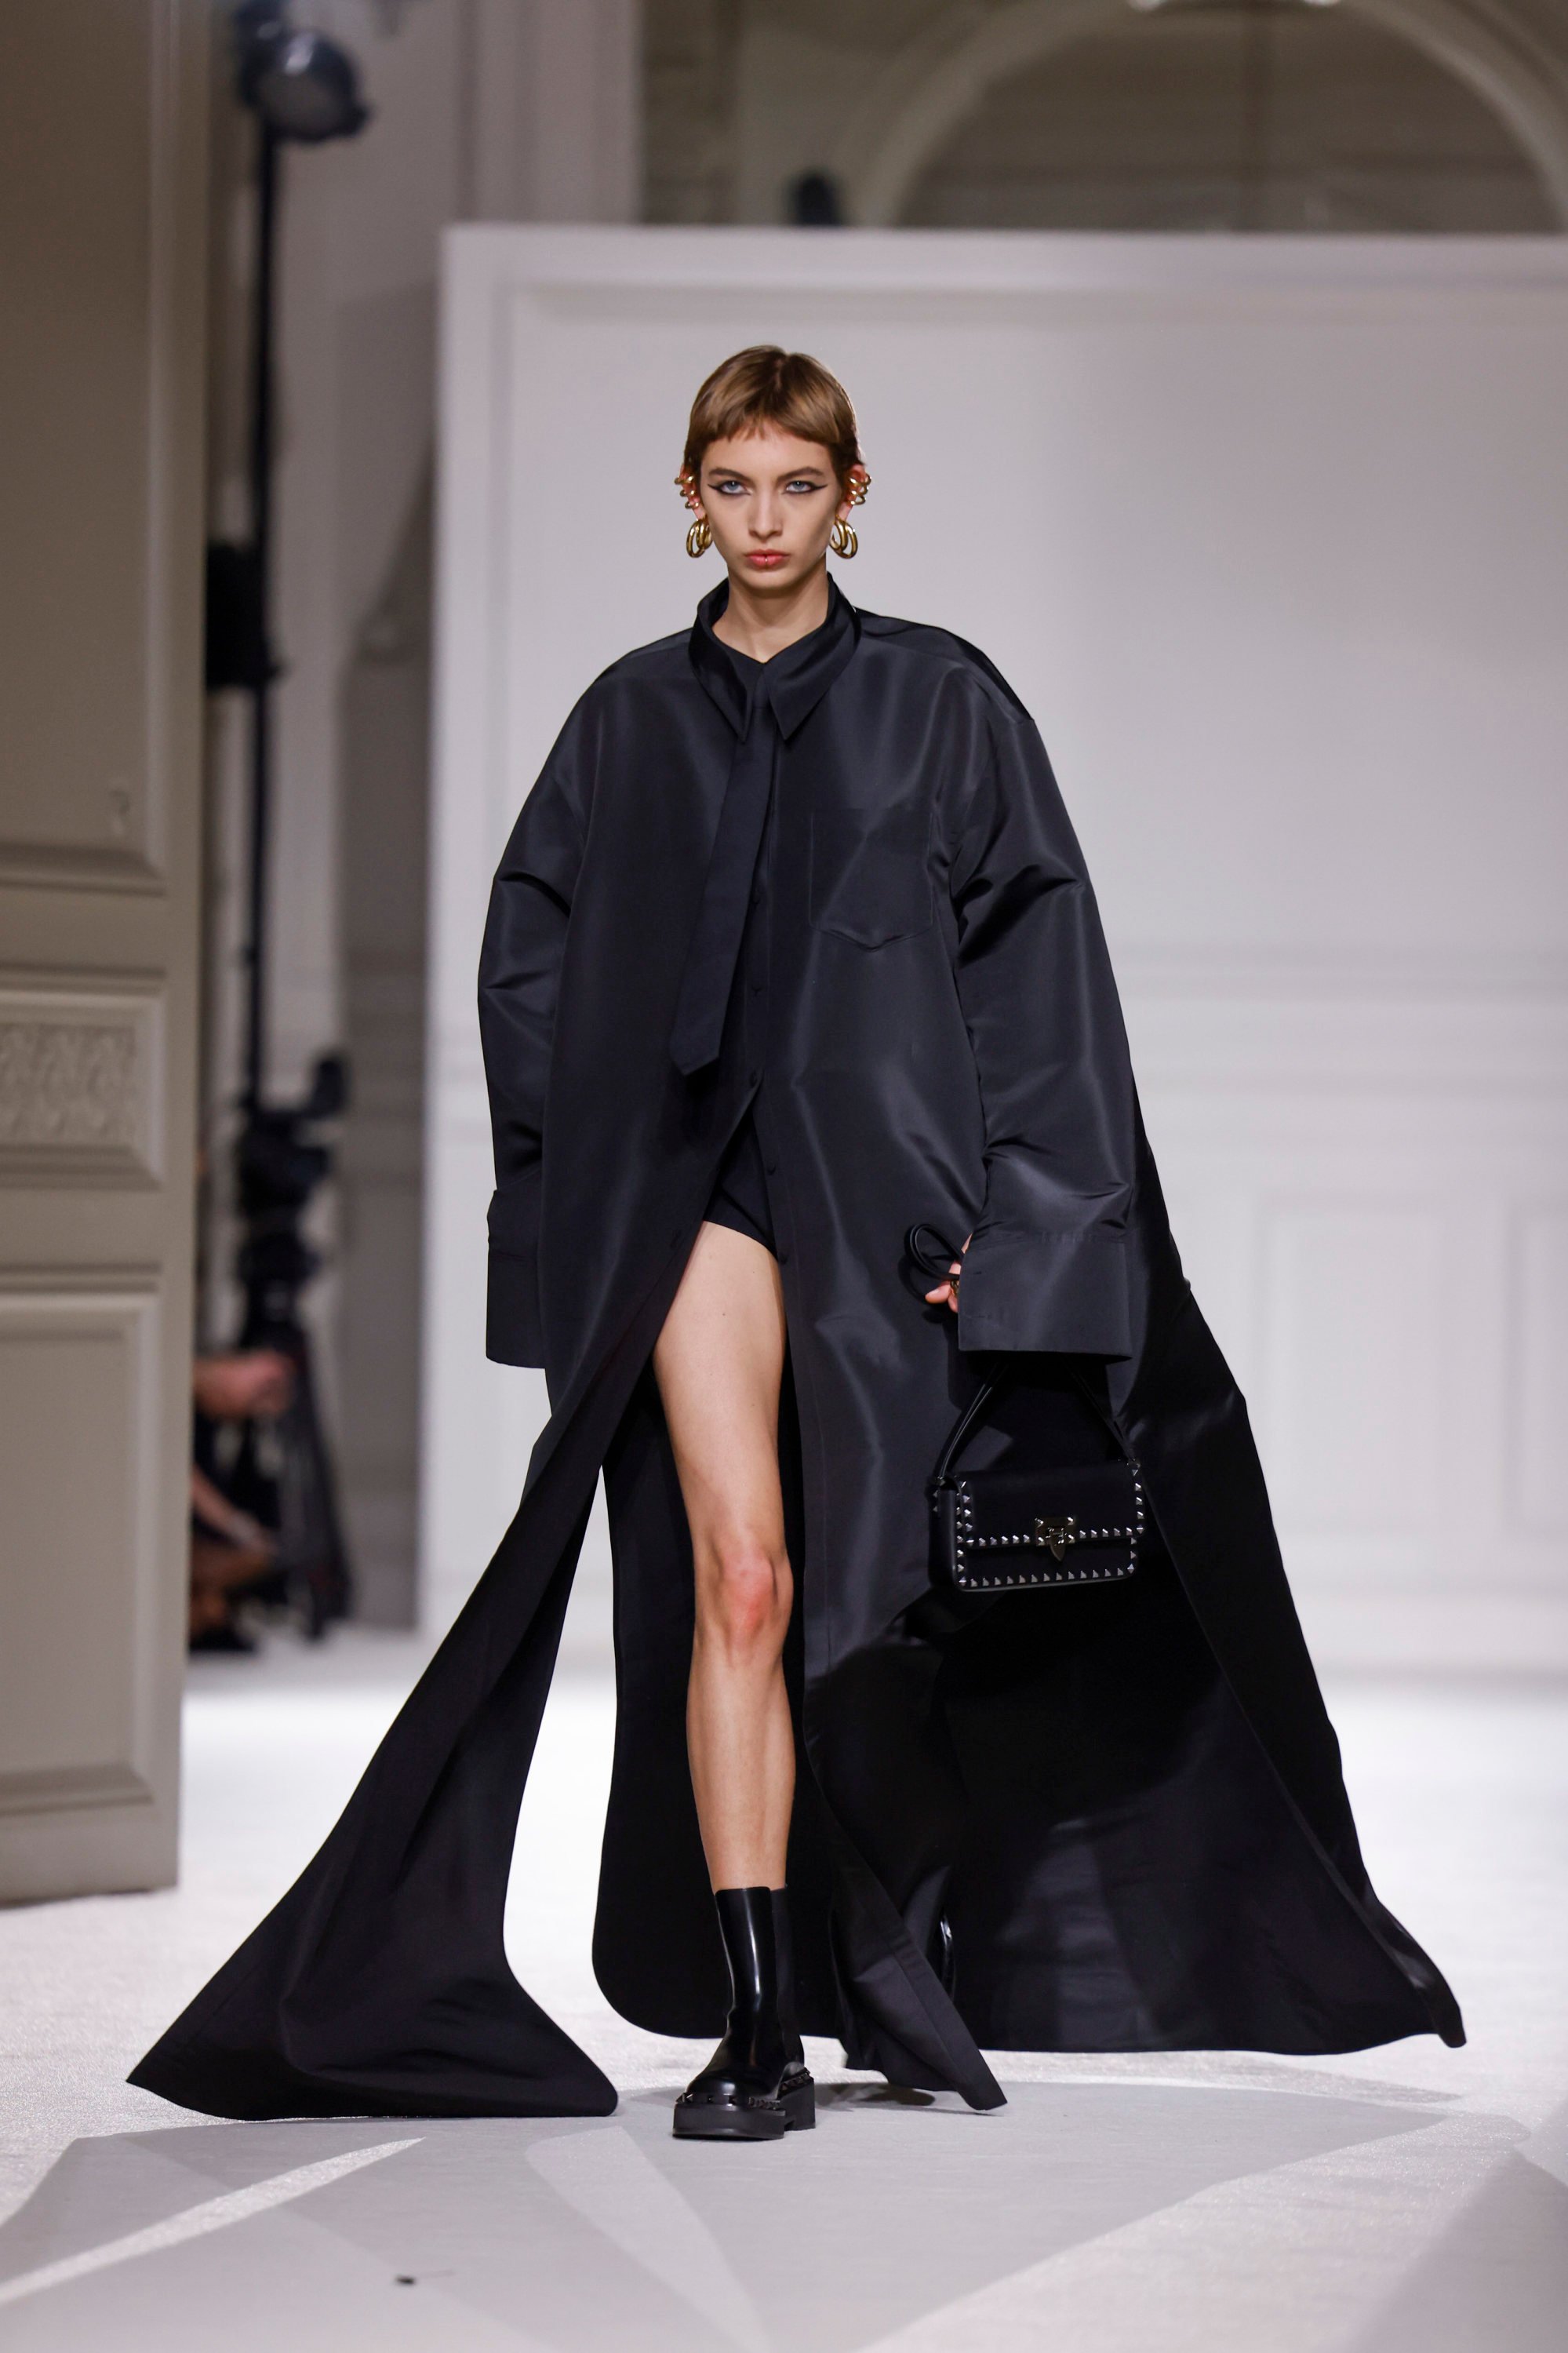 Paris Fashion Week 2023: Valentino’s black-tie show brought A-listers ...